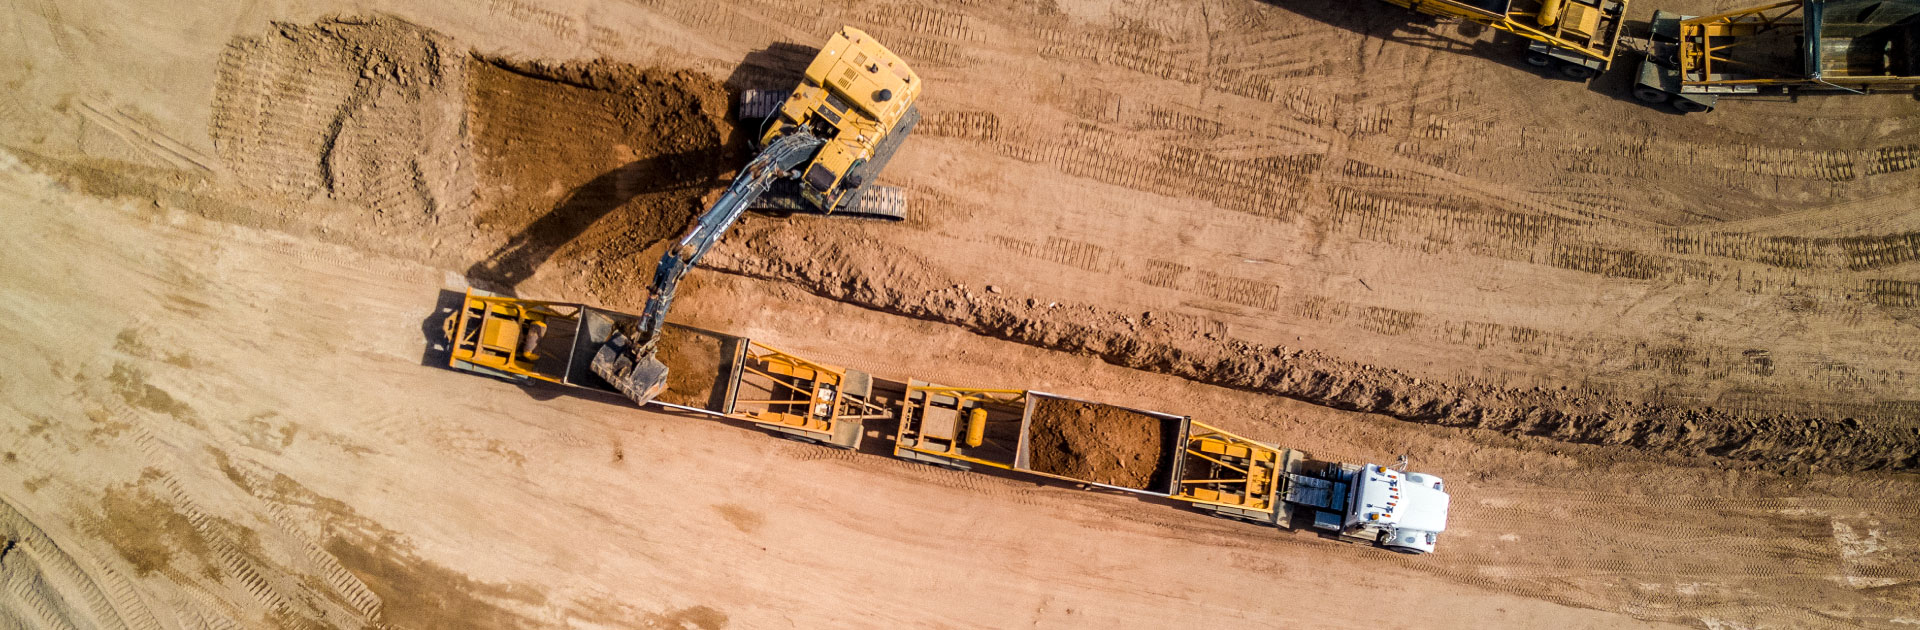 An aerial view of a bottom dump truck receiving a load of dirt from a backhoe.